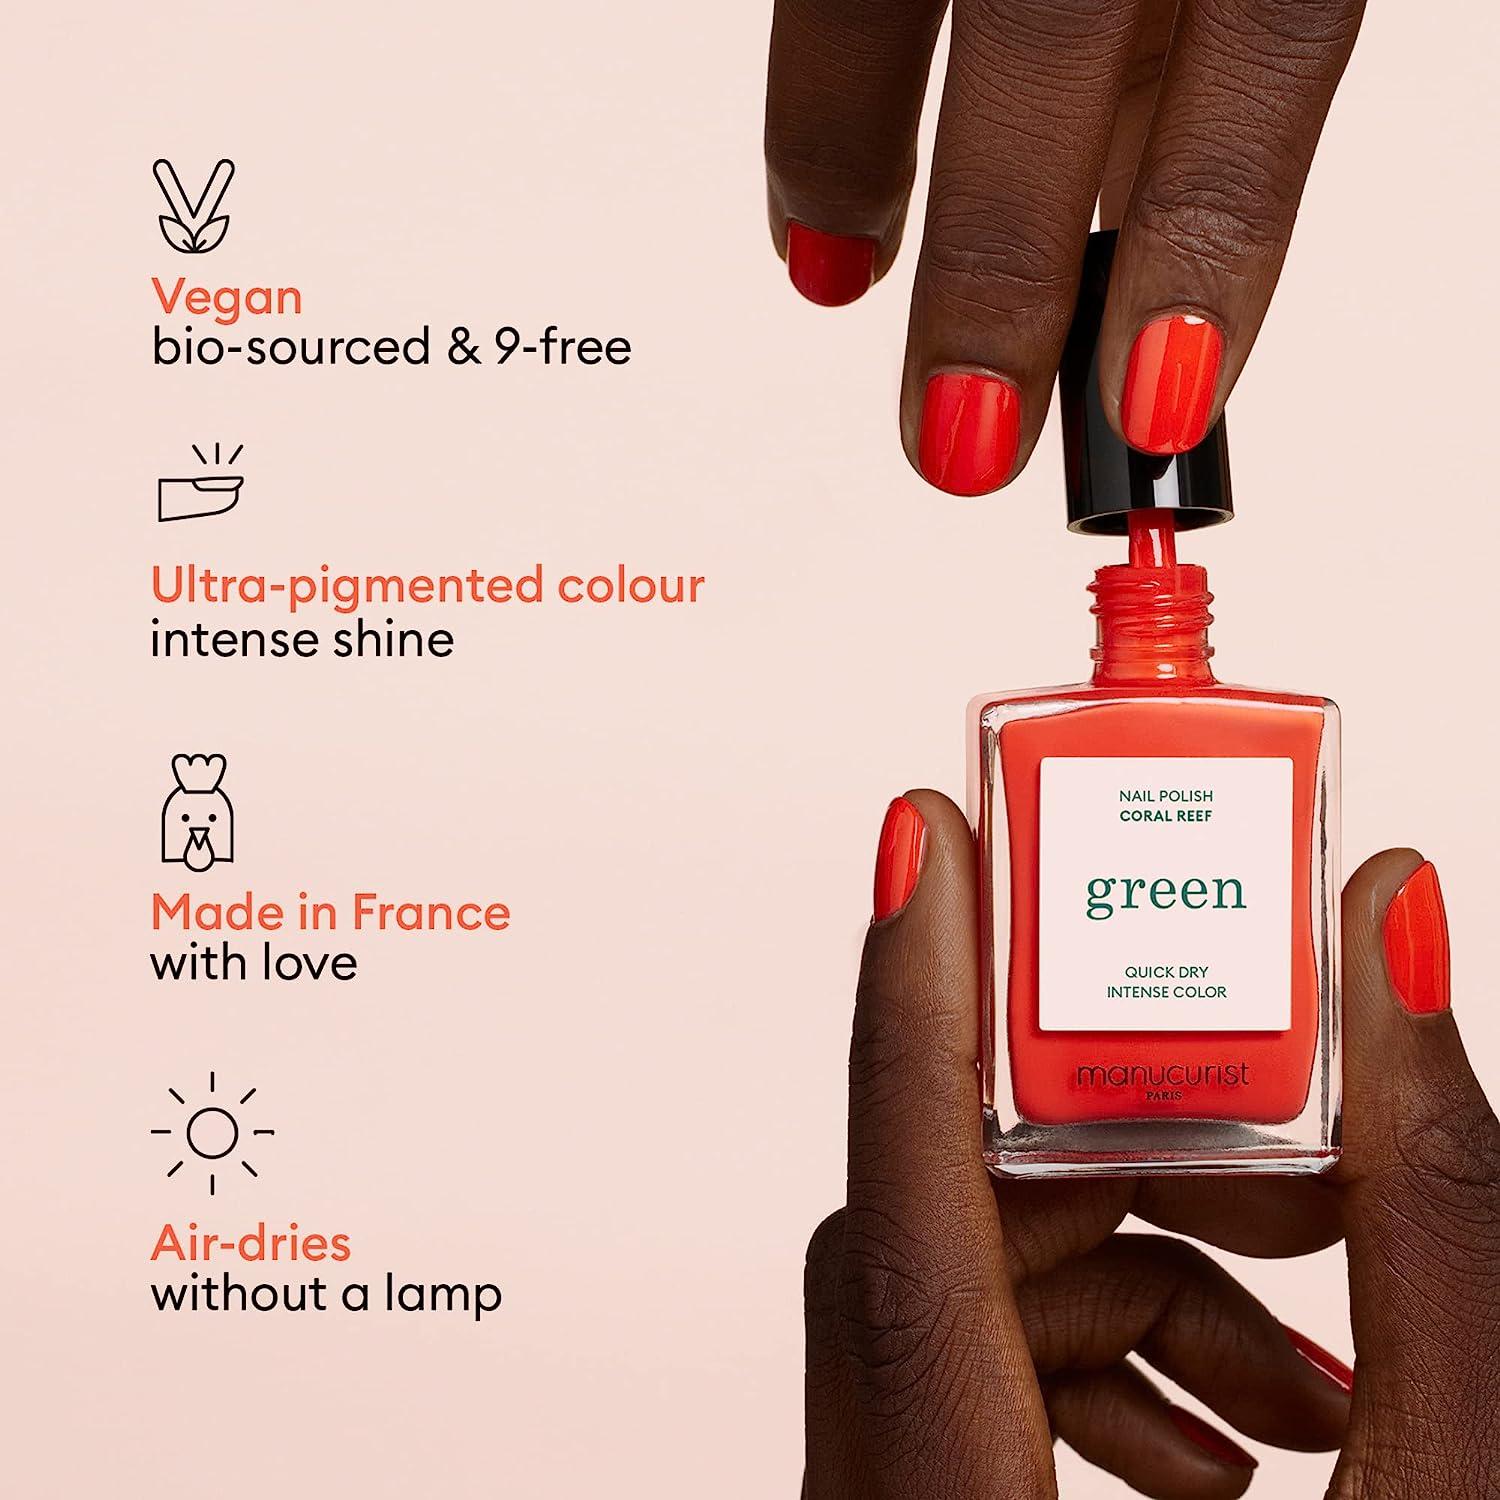 Essie Nail Polishes Are Vegan and 8-Free Now | Allure